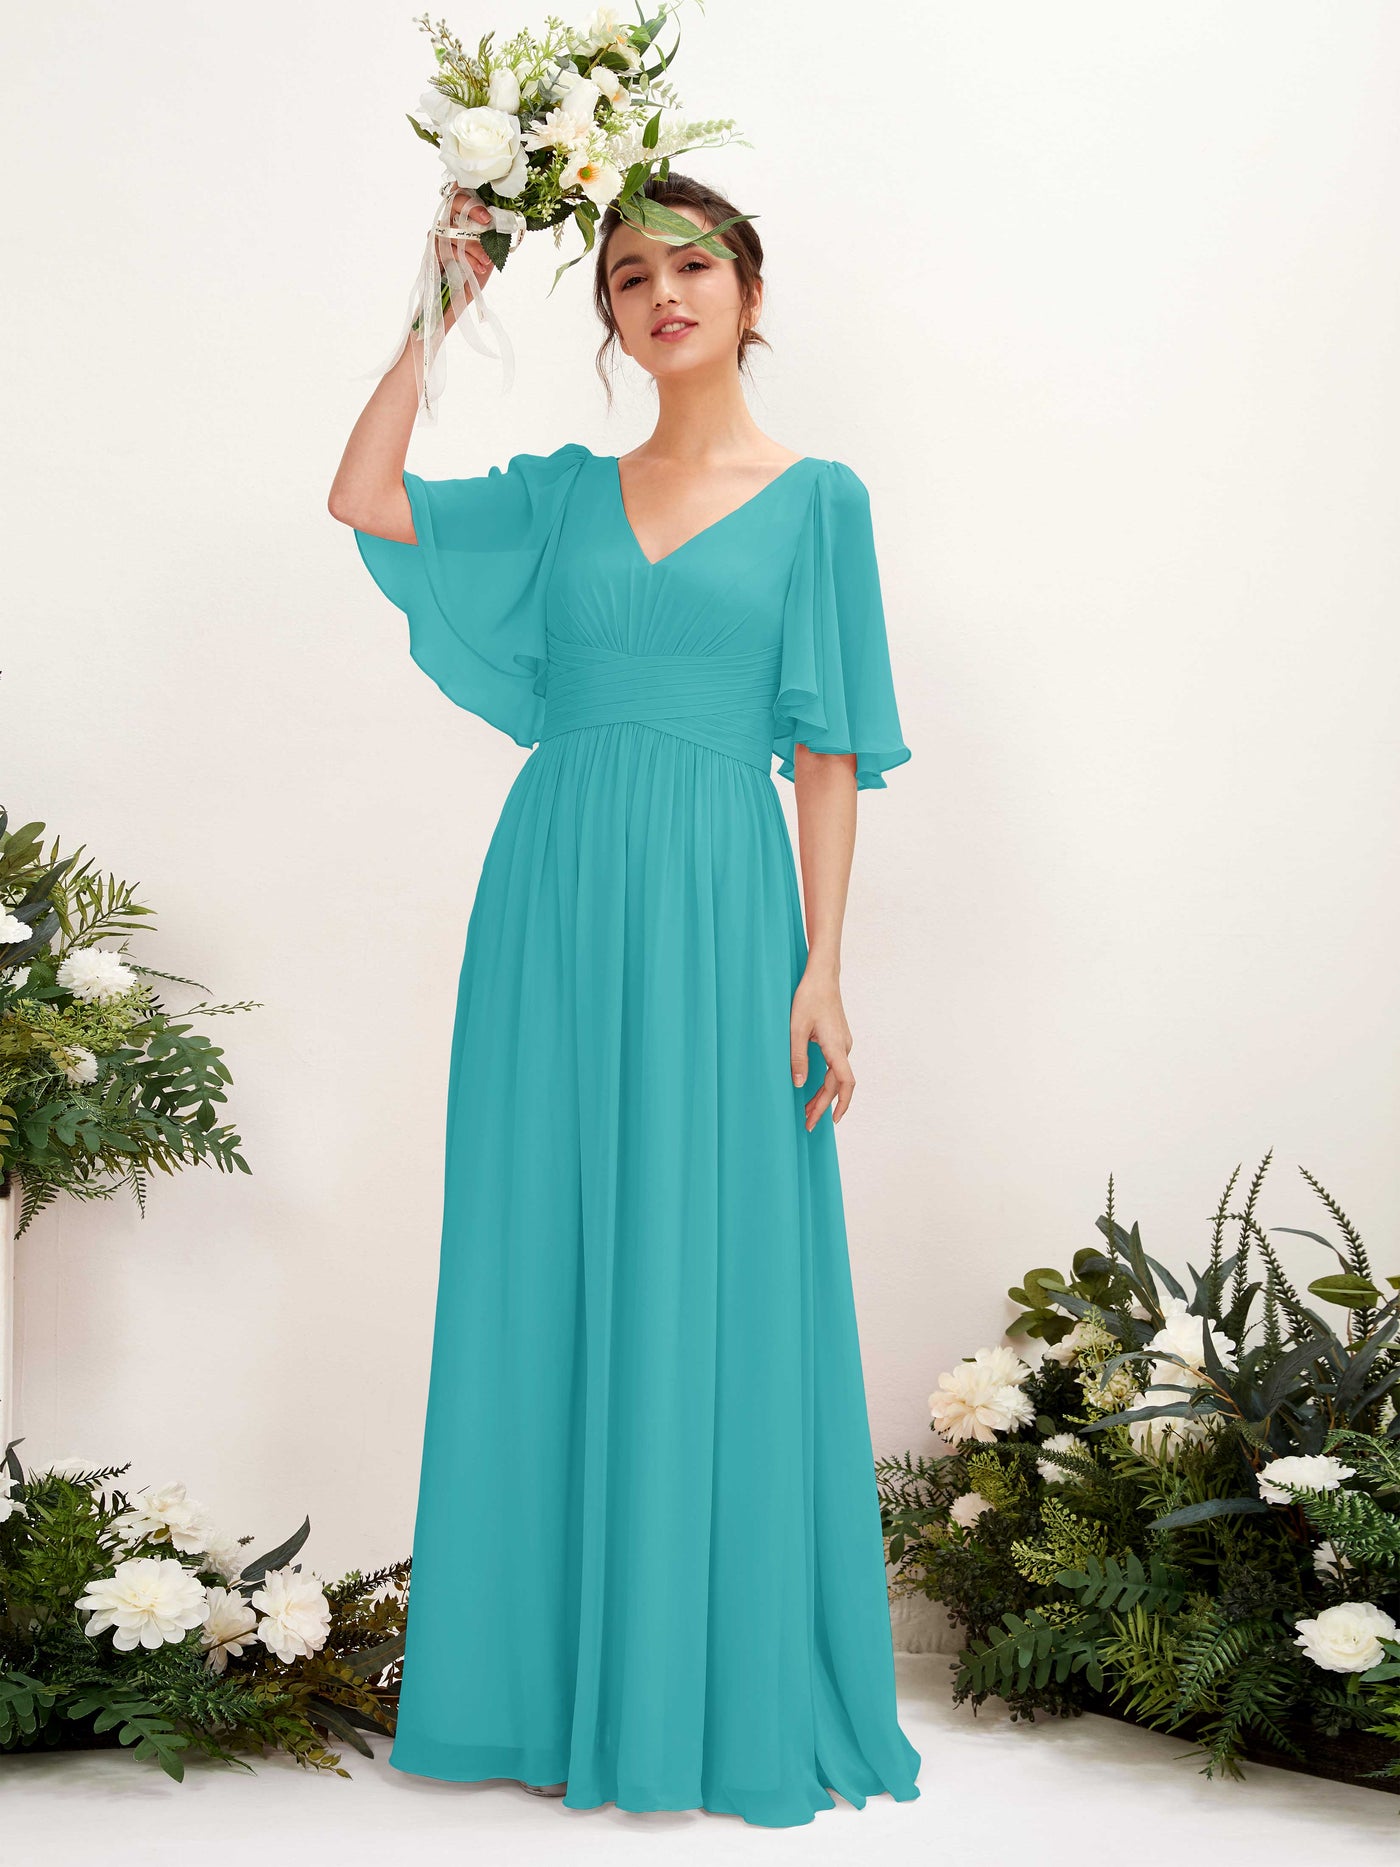 Turquoise Bridesmaid Dresses Bridesmaid Dress A-line Chiffon V-neck Full Length 1/2 Sleeves Wedding Party Dress (81221623)#color_turquoise